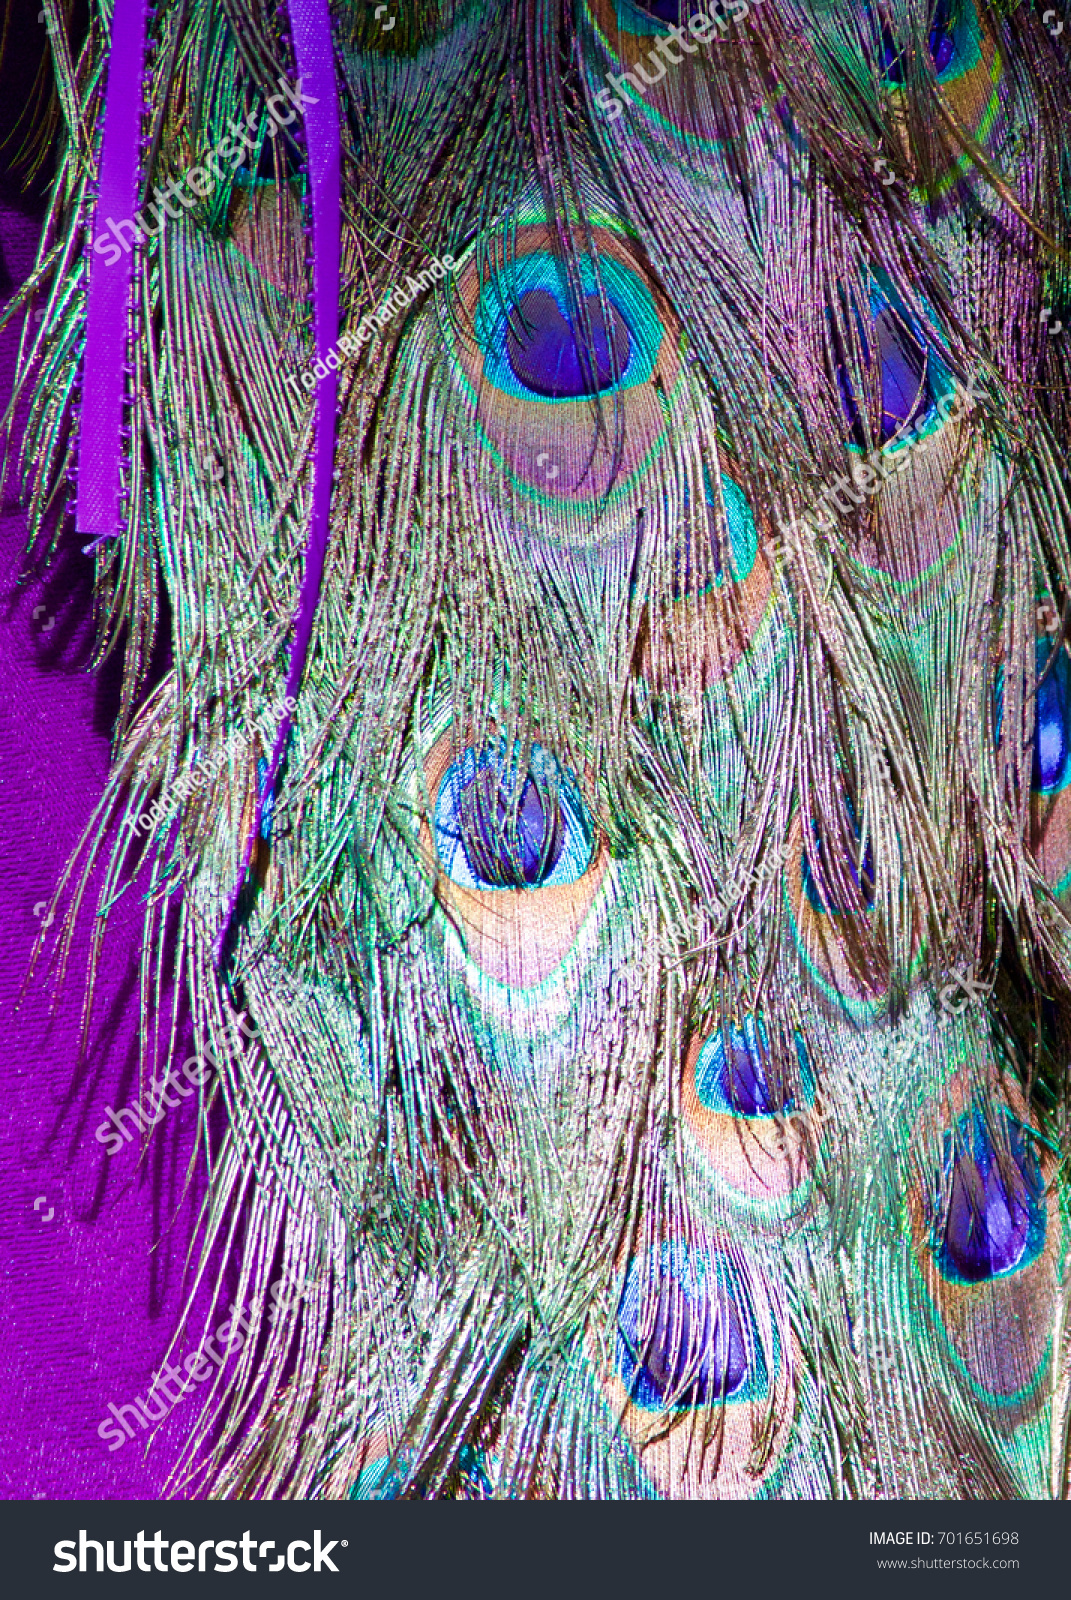 Download Peacock Feathers Ribbon On Purple Background Stock Photo Edit Now 701651698